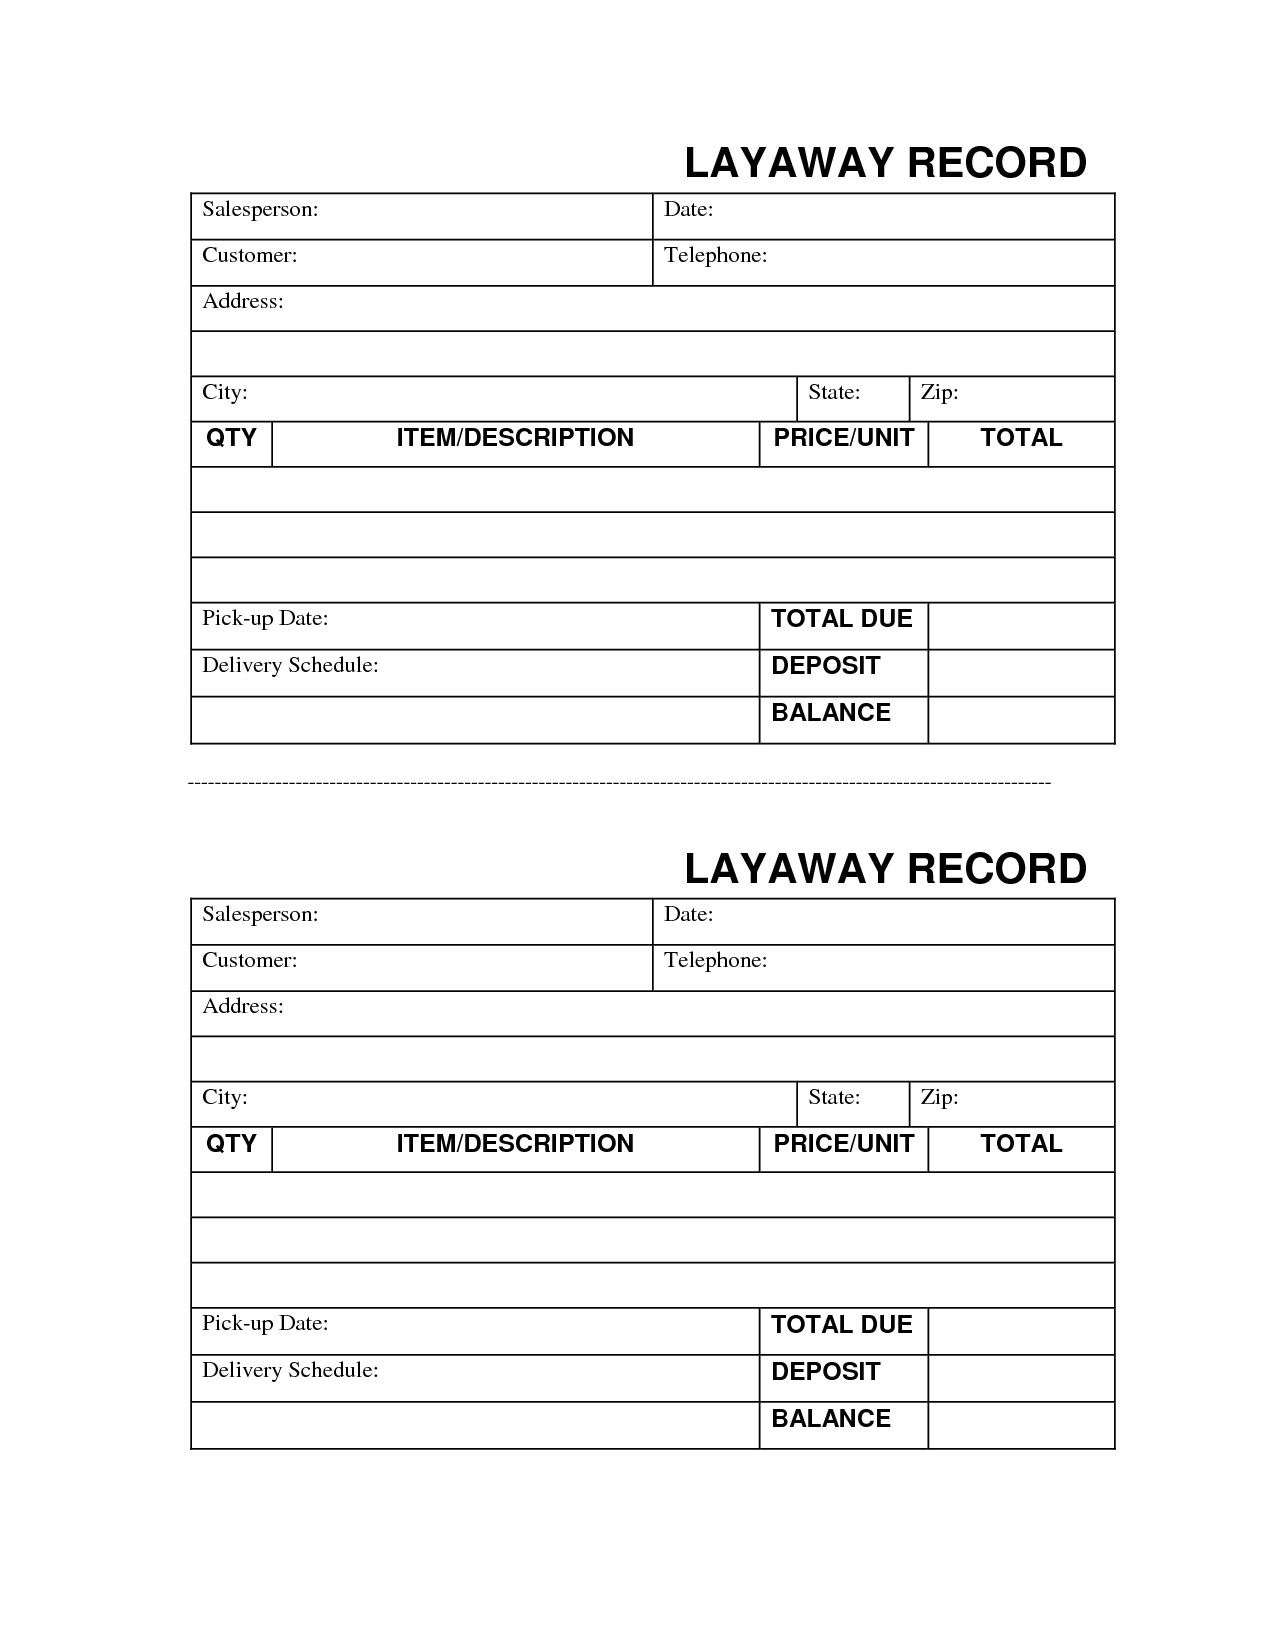 free printable layaway forms qo related searches qsrc 1